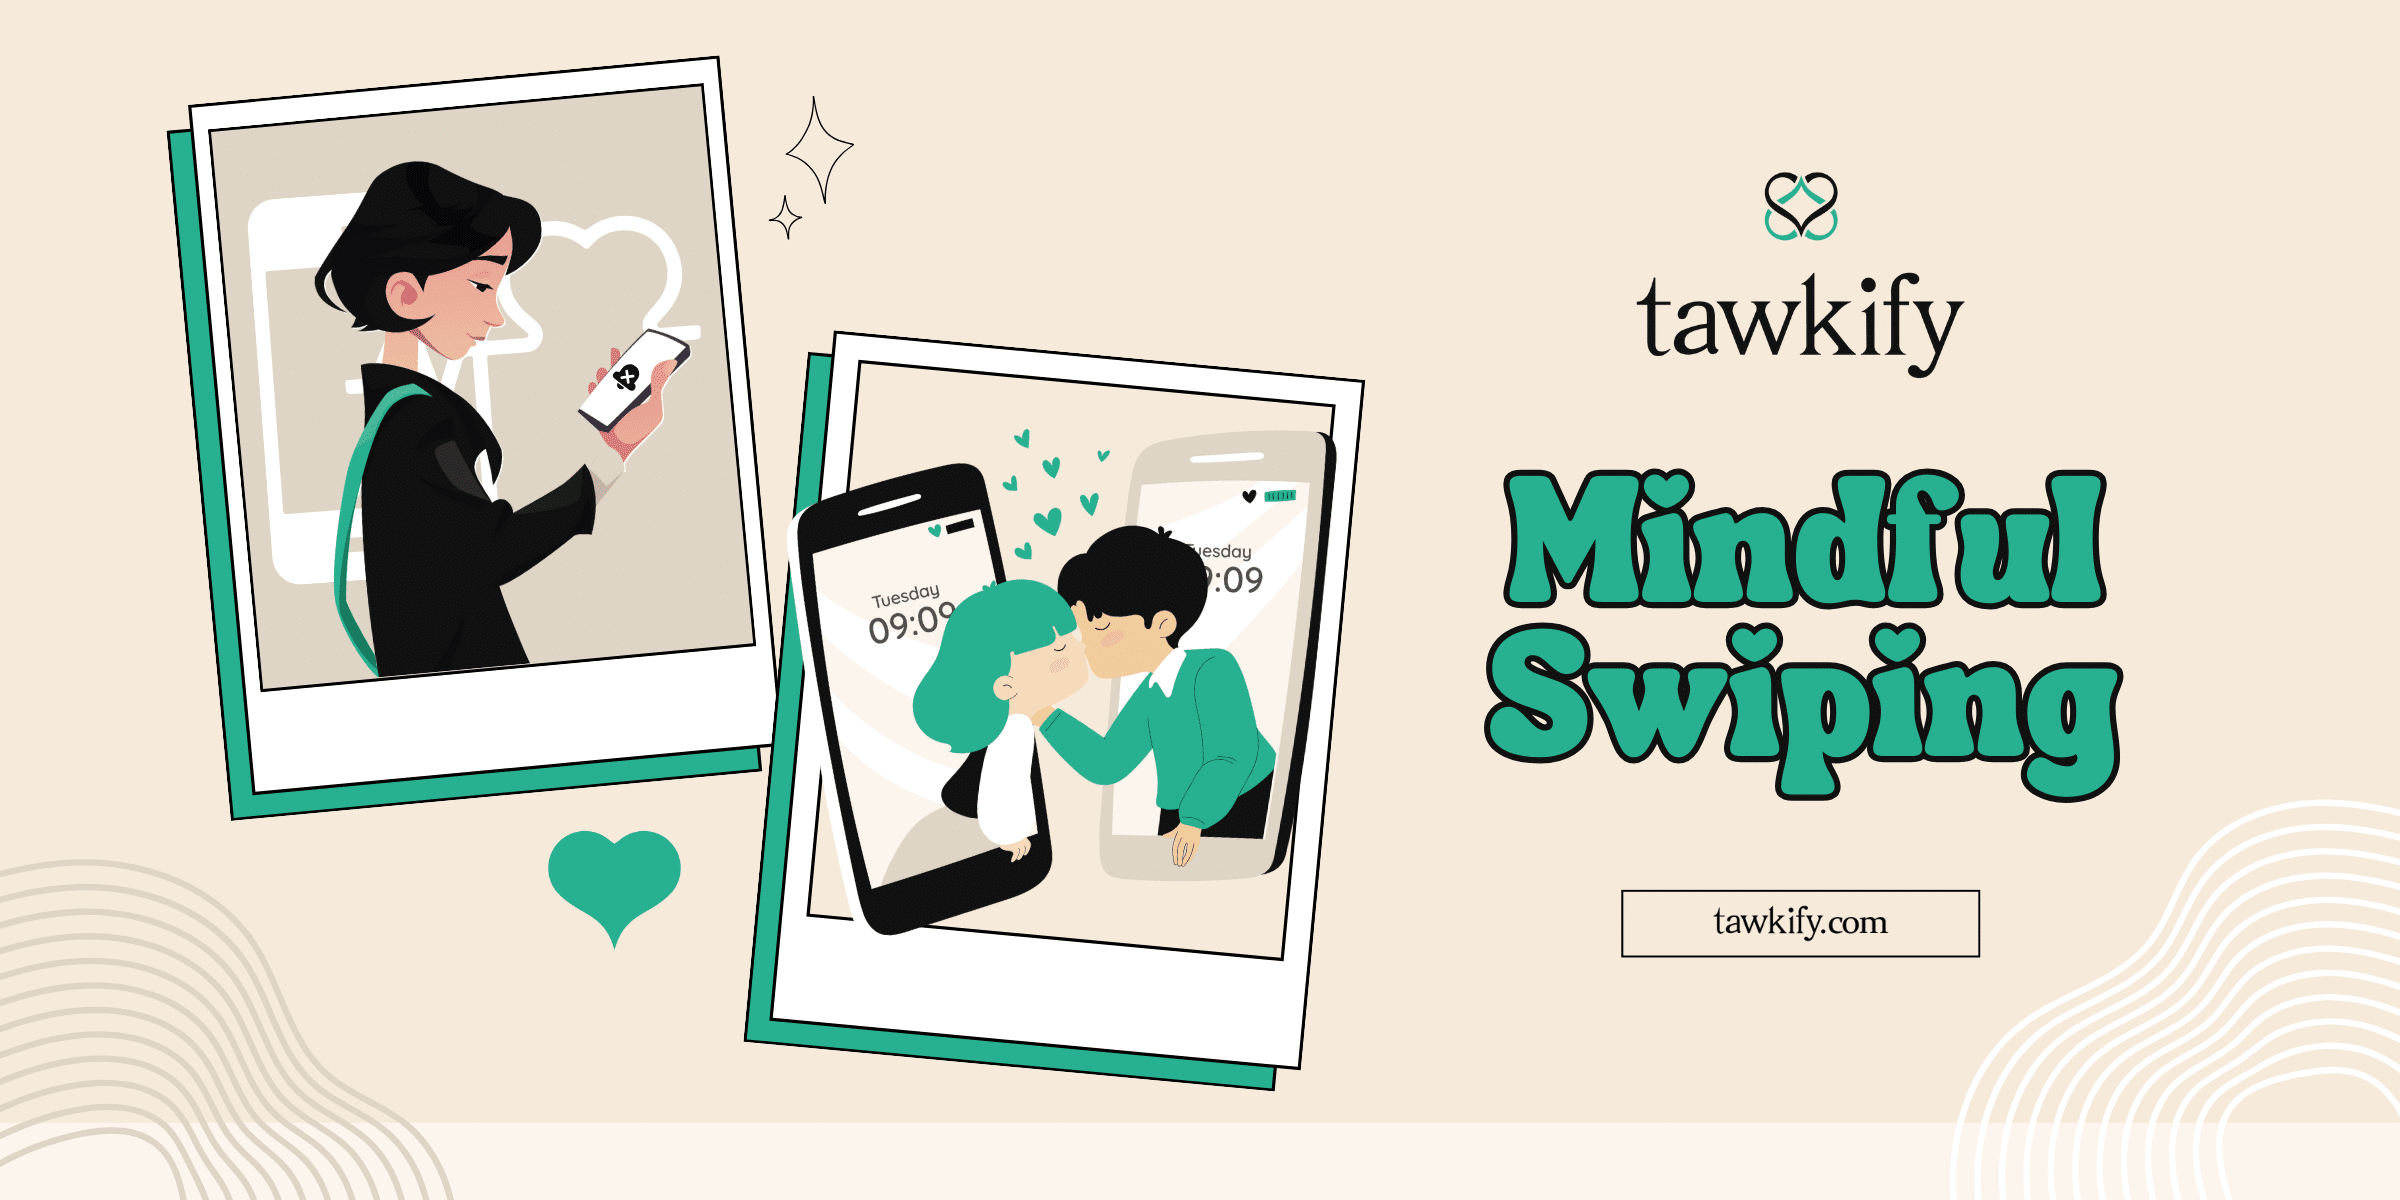 Are the dating apps contributing to your sense of dating fatigue? If so, check out our guide for tips on how to practice mindful swiping!